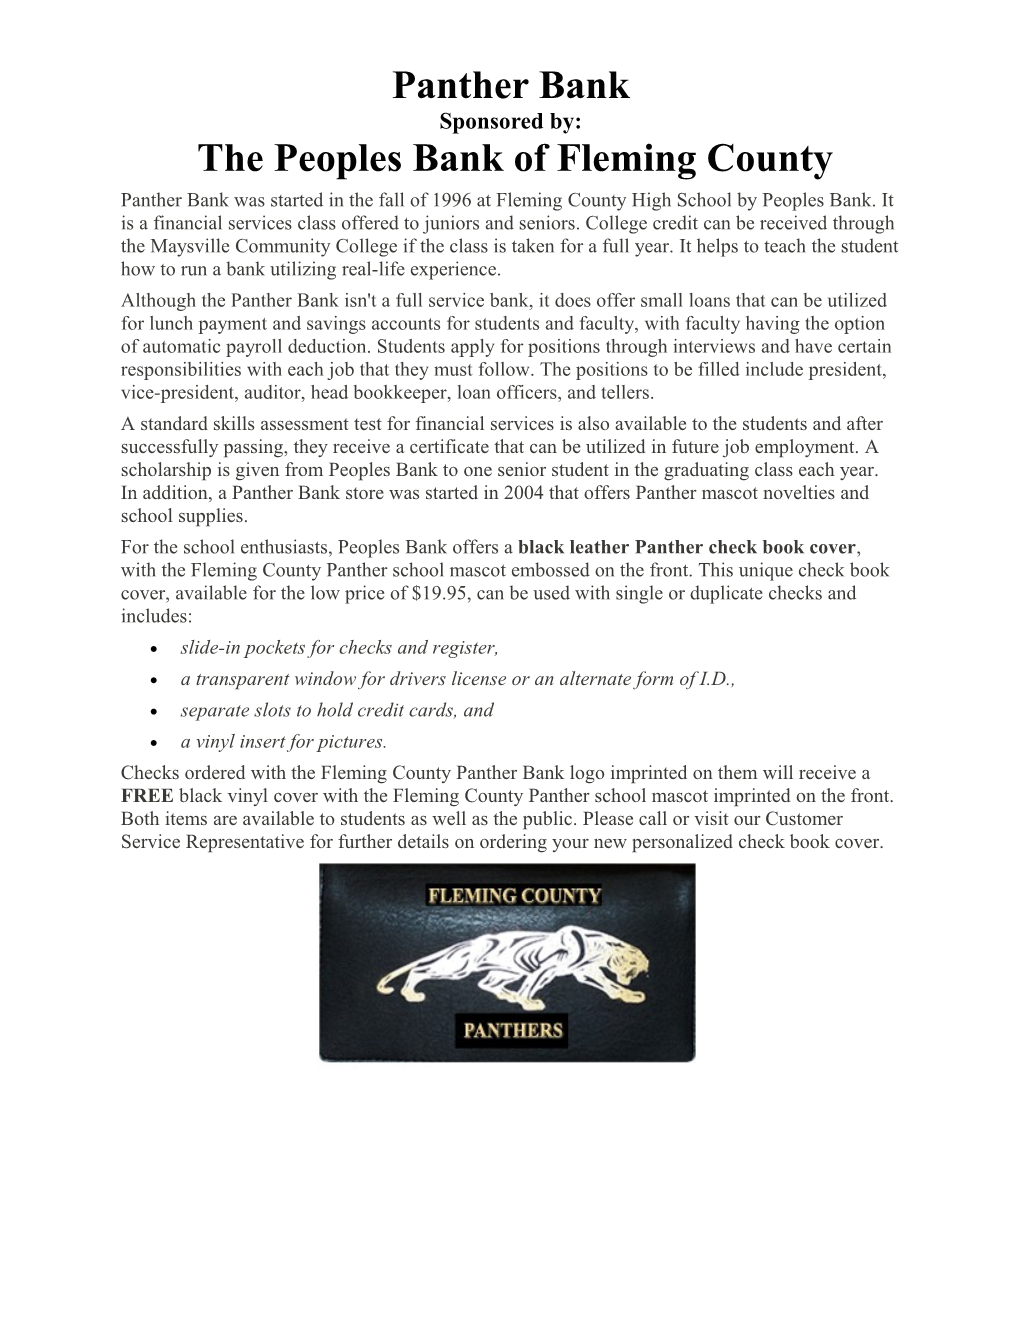 The Peoples Bank of Fleming County